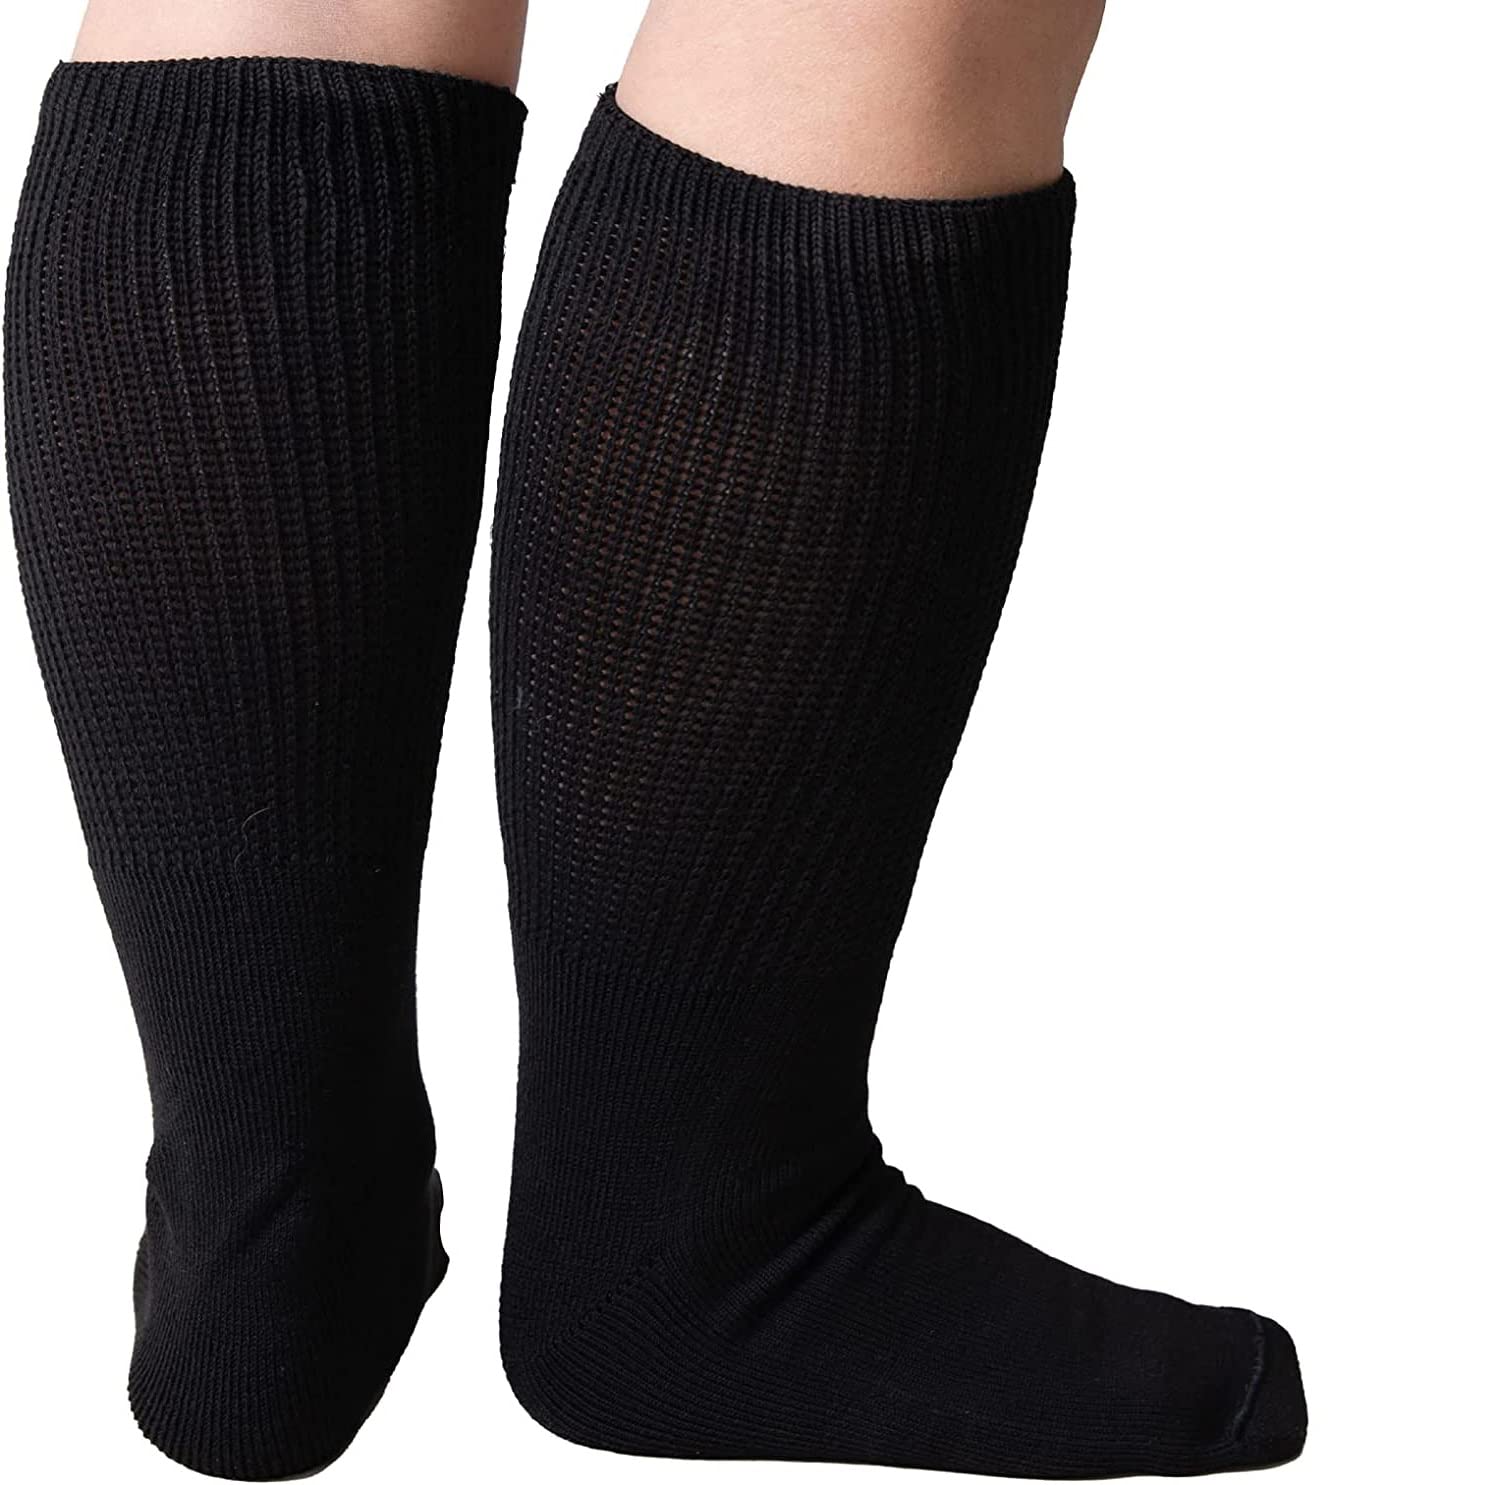 3 Pairs Extra Wide Socks for Swollen Feet, Extra Wide Bariatric Socks,  Swollen Feet,Socks Women